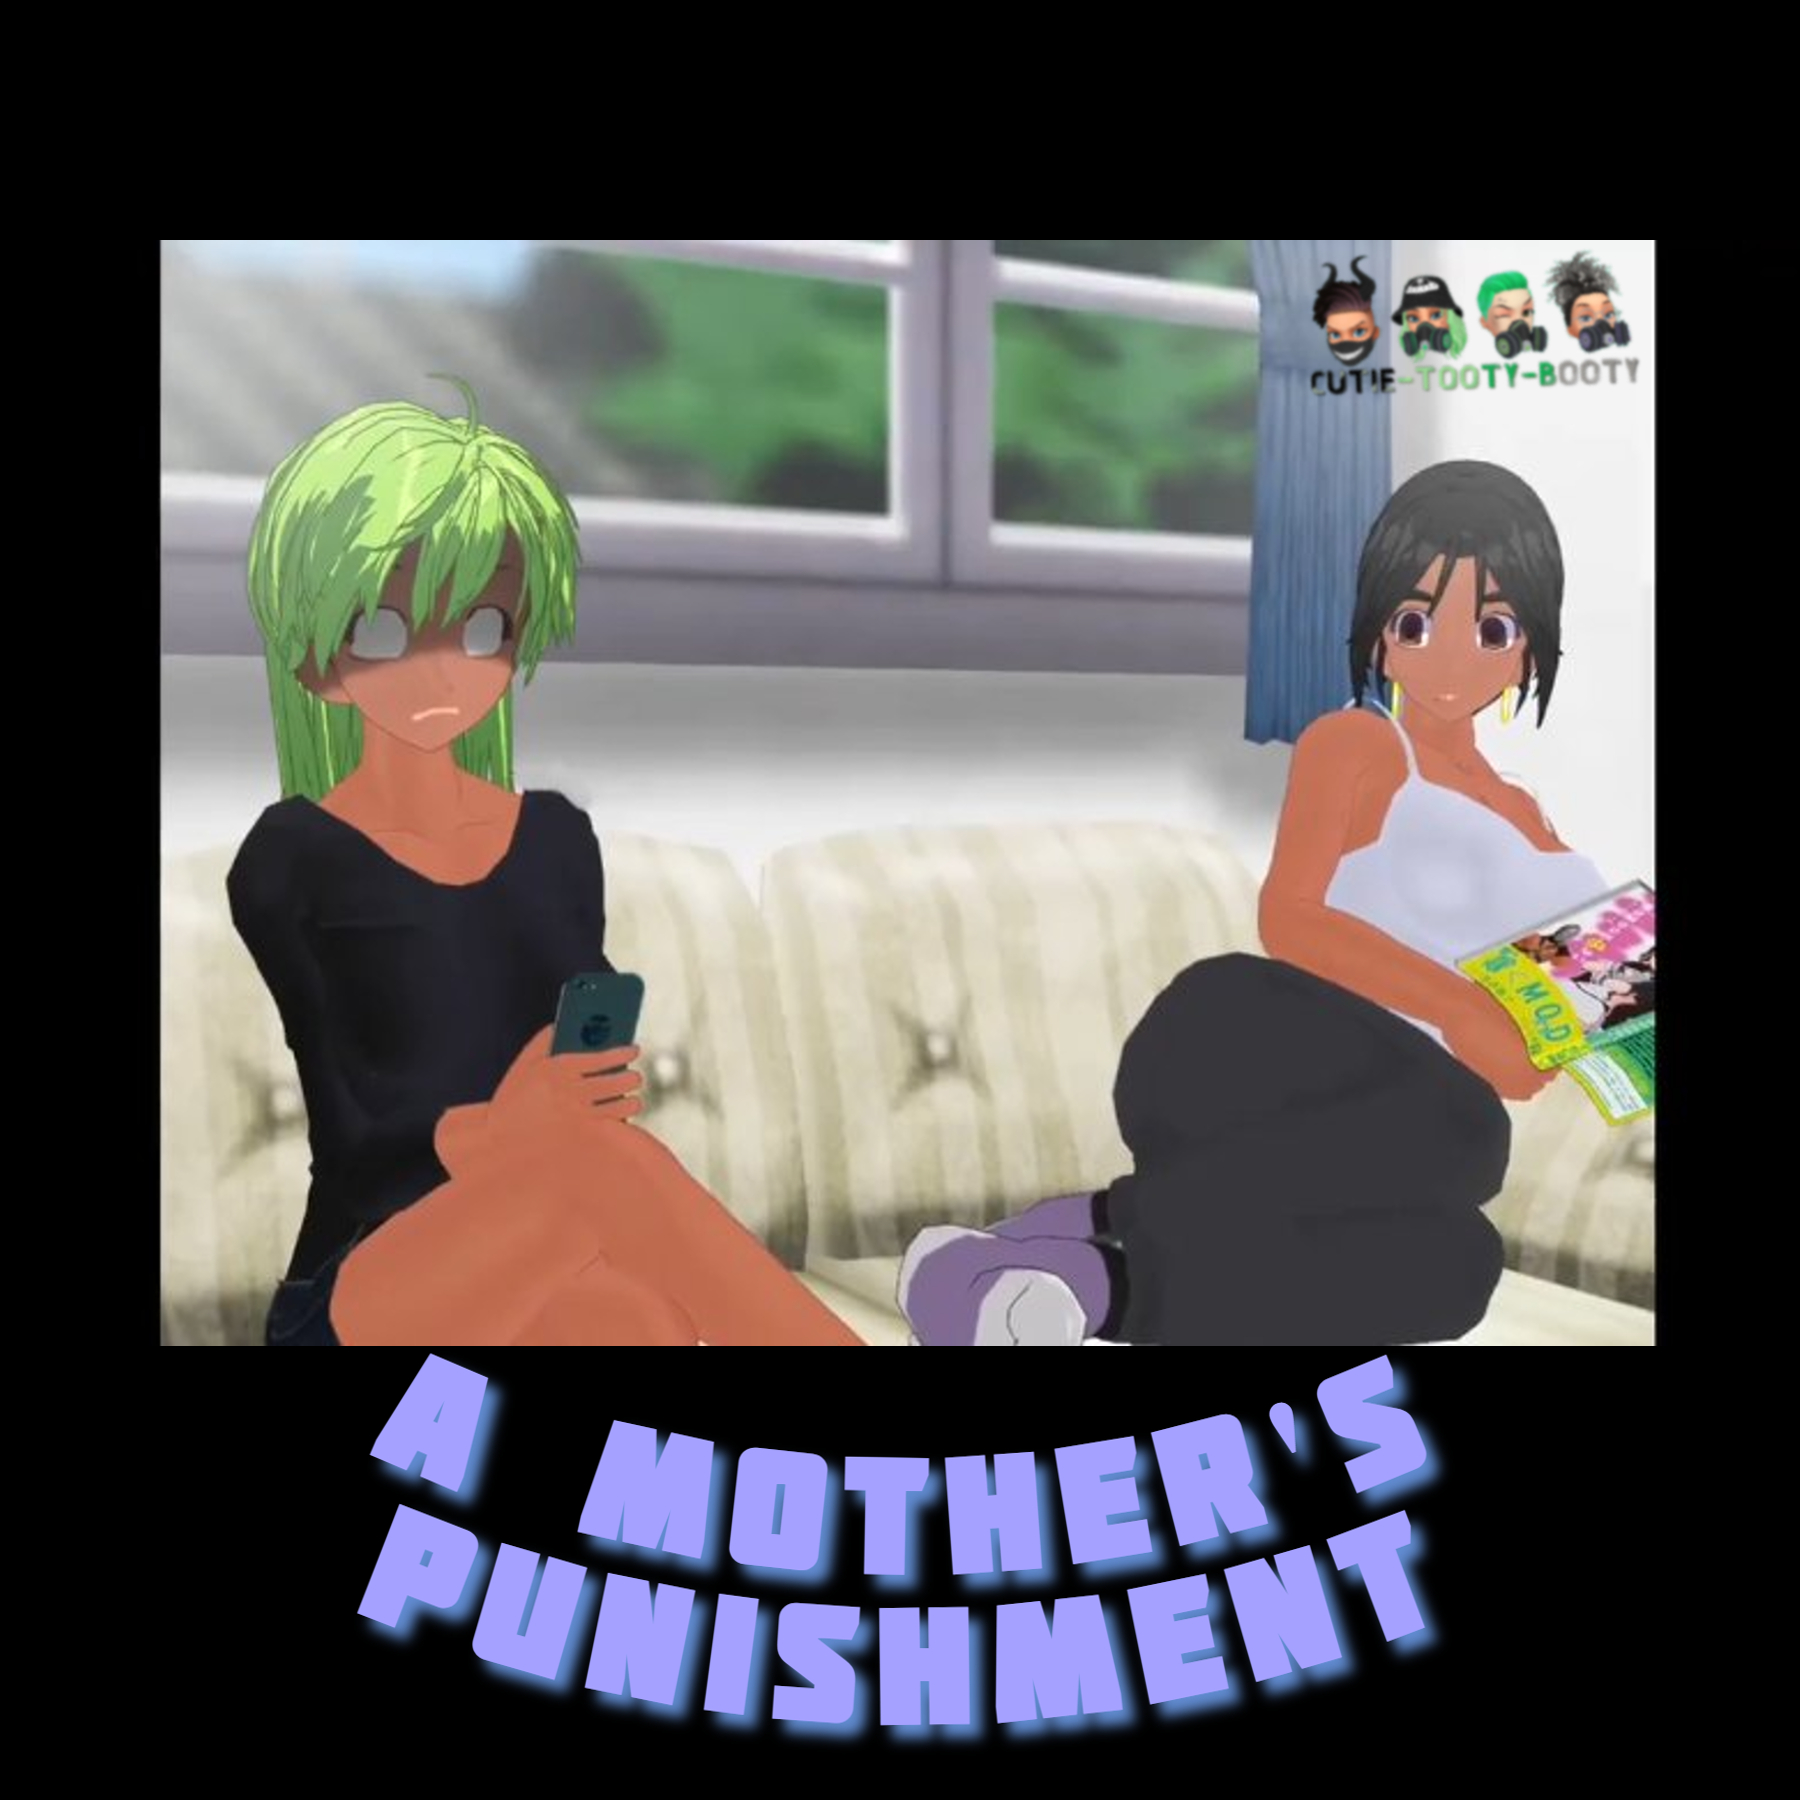 A Mother's Punishment